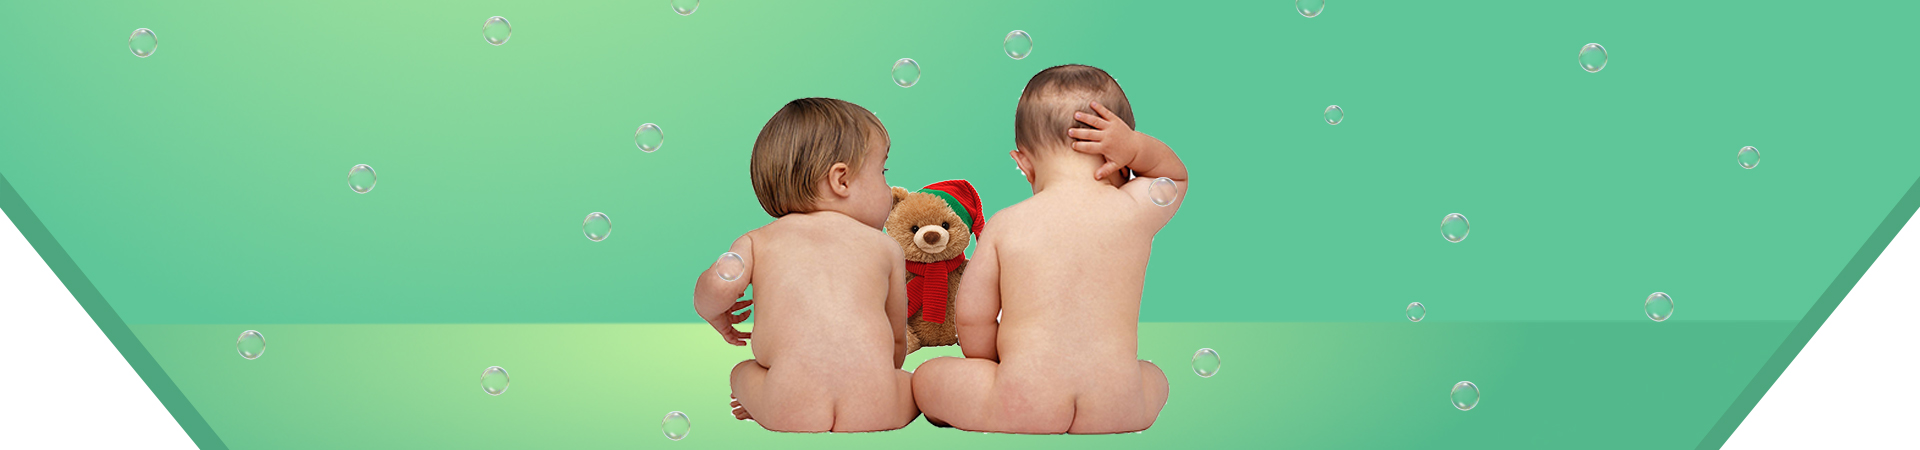 Image showcasing baby lotion, a must-have for moisturizing delicate baby skin